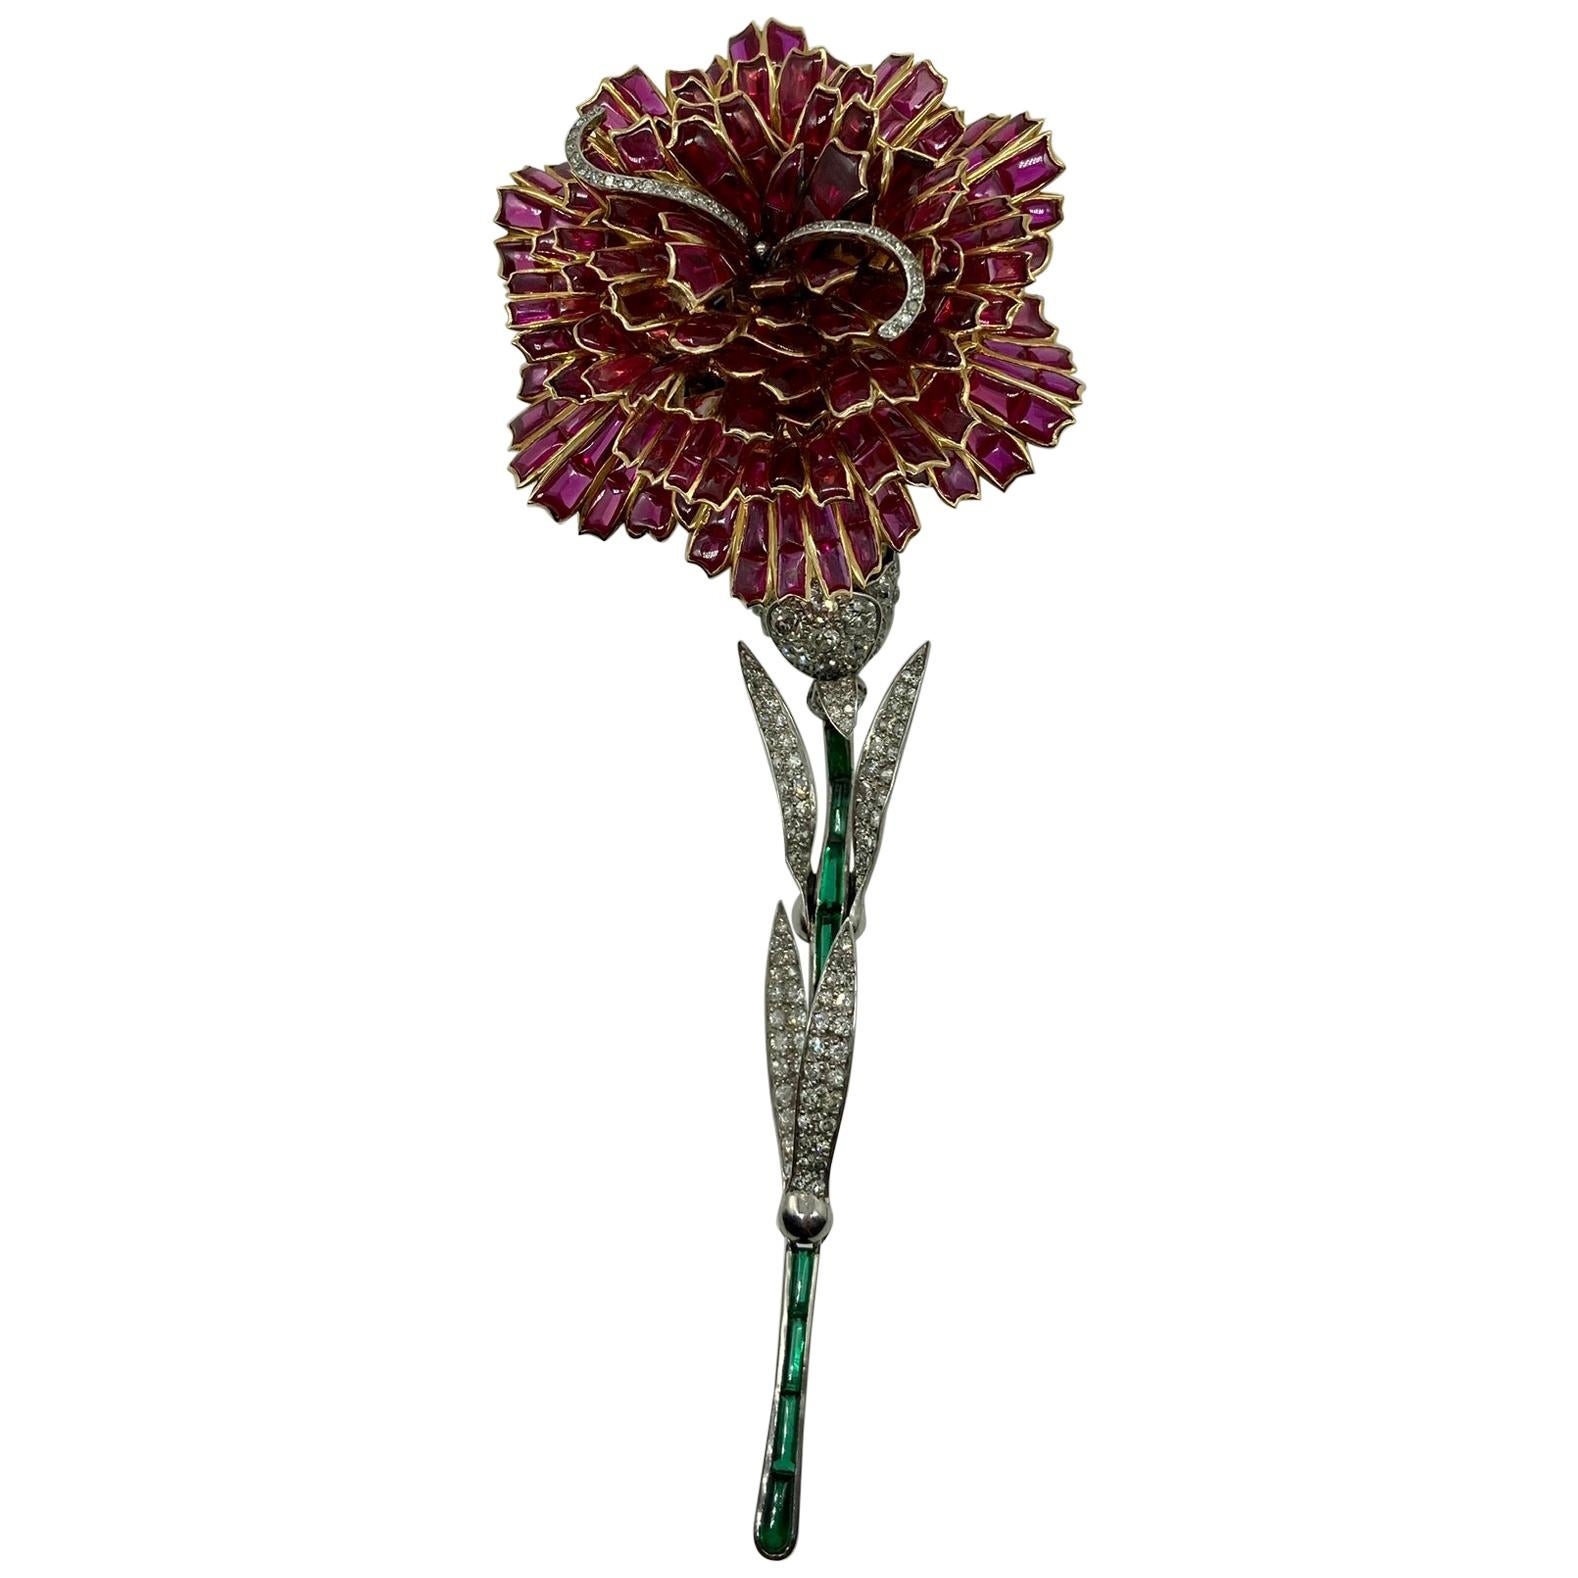 Fabergé Ruby, Emerald, and Diamond Flower Brooch